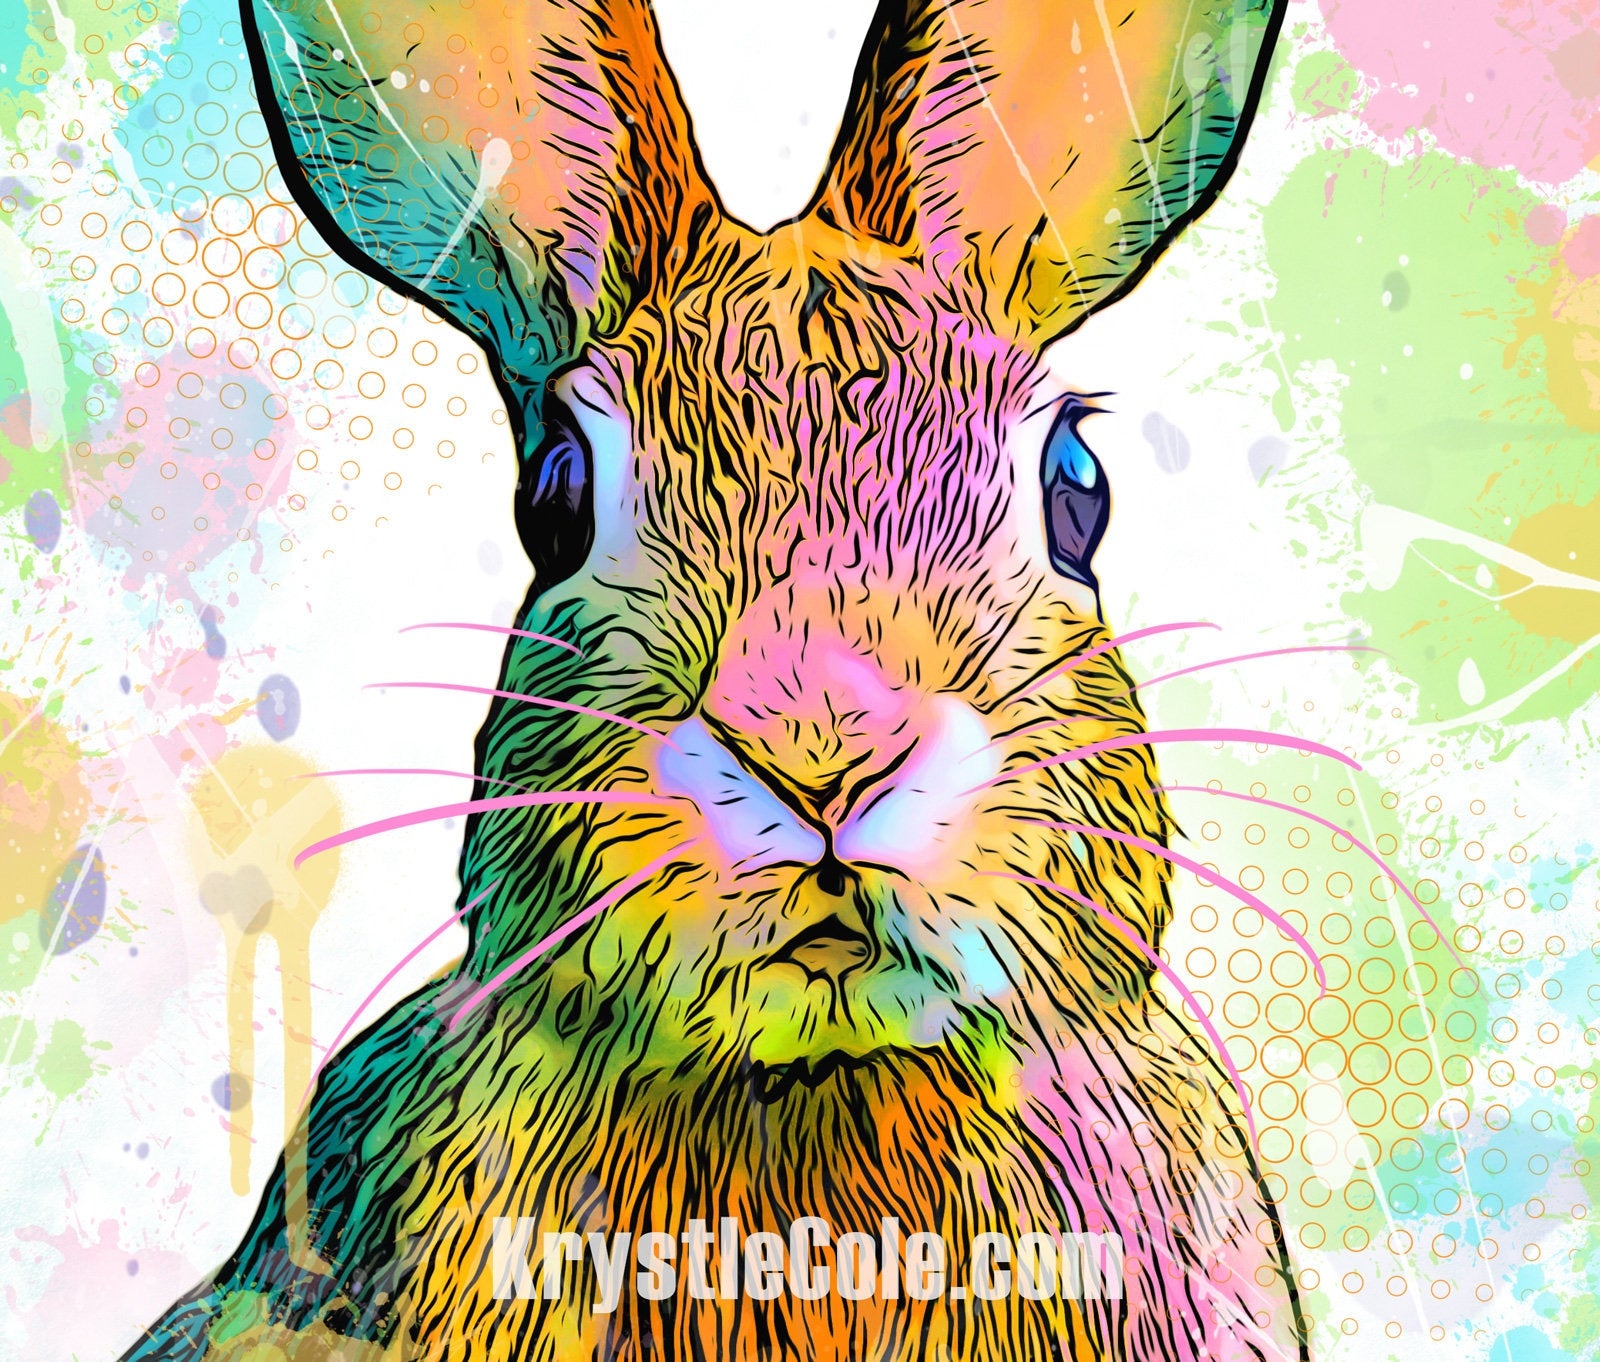 Bunny Rabbit Art - Bunny Canvas. Rabbit Gifts. Rabbit Print on CANVAS or PAPER *Each Print Hand Signed*